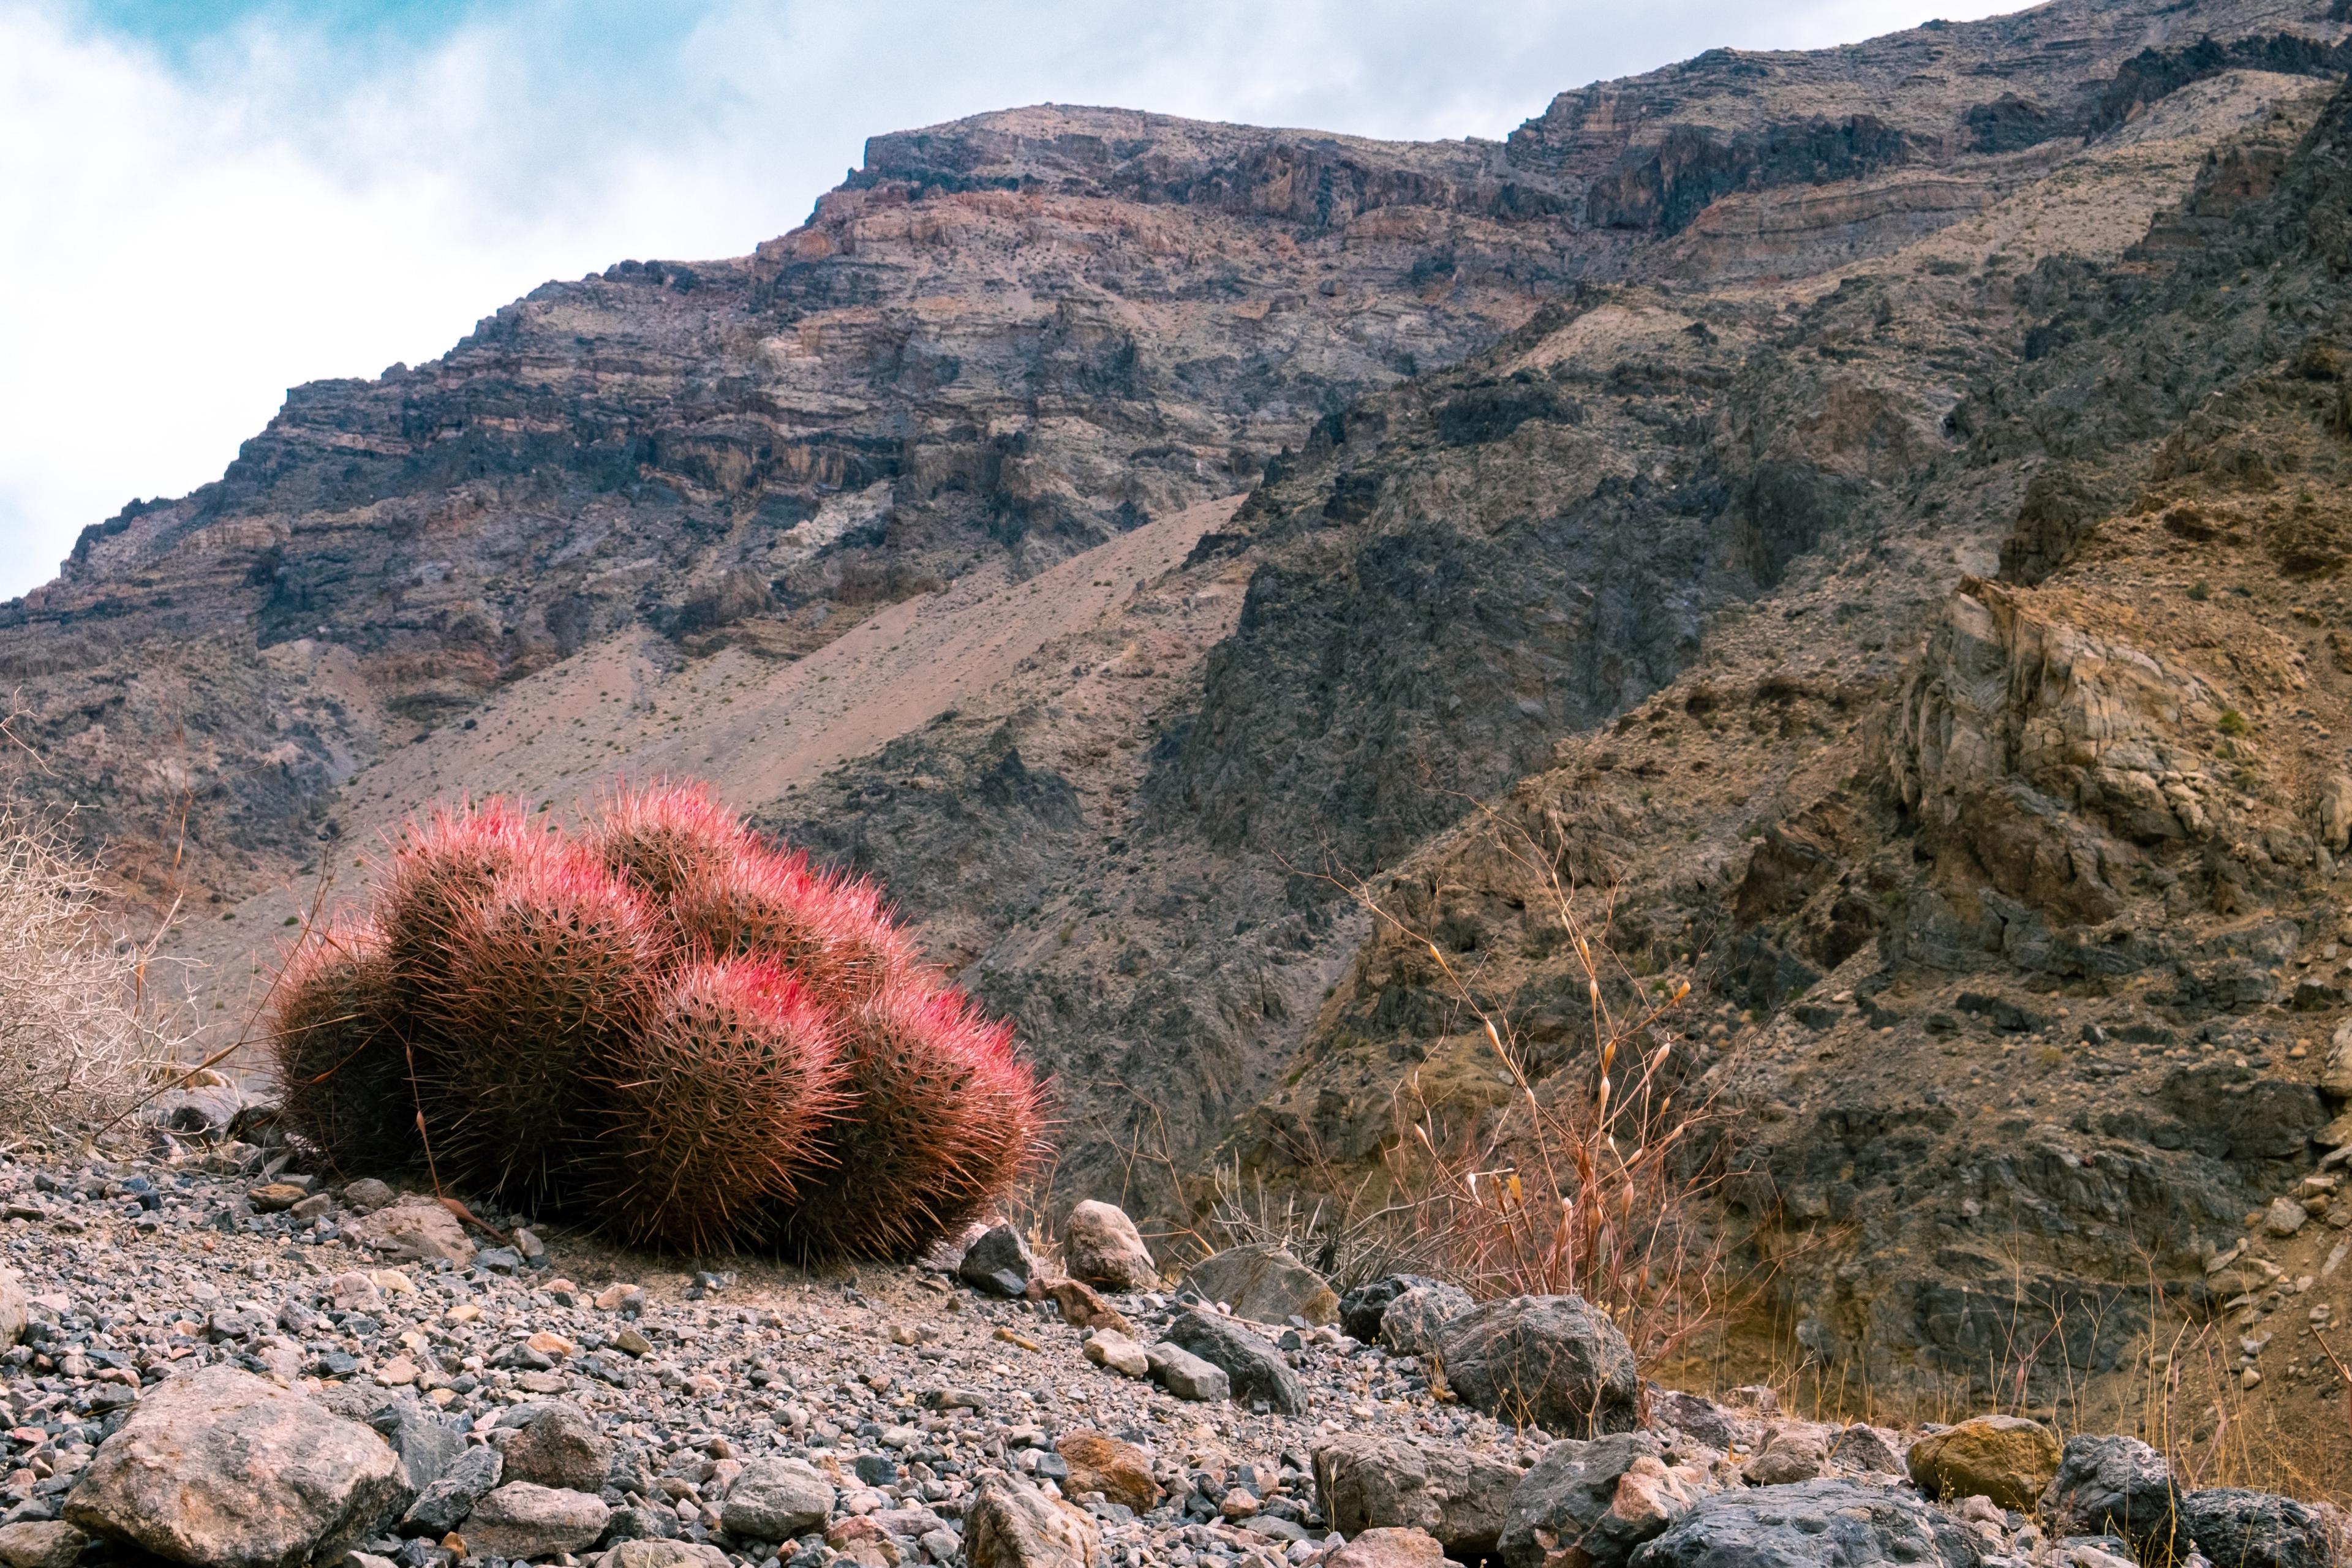 Cacti blooming in Death Valley.